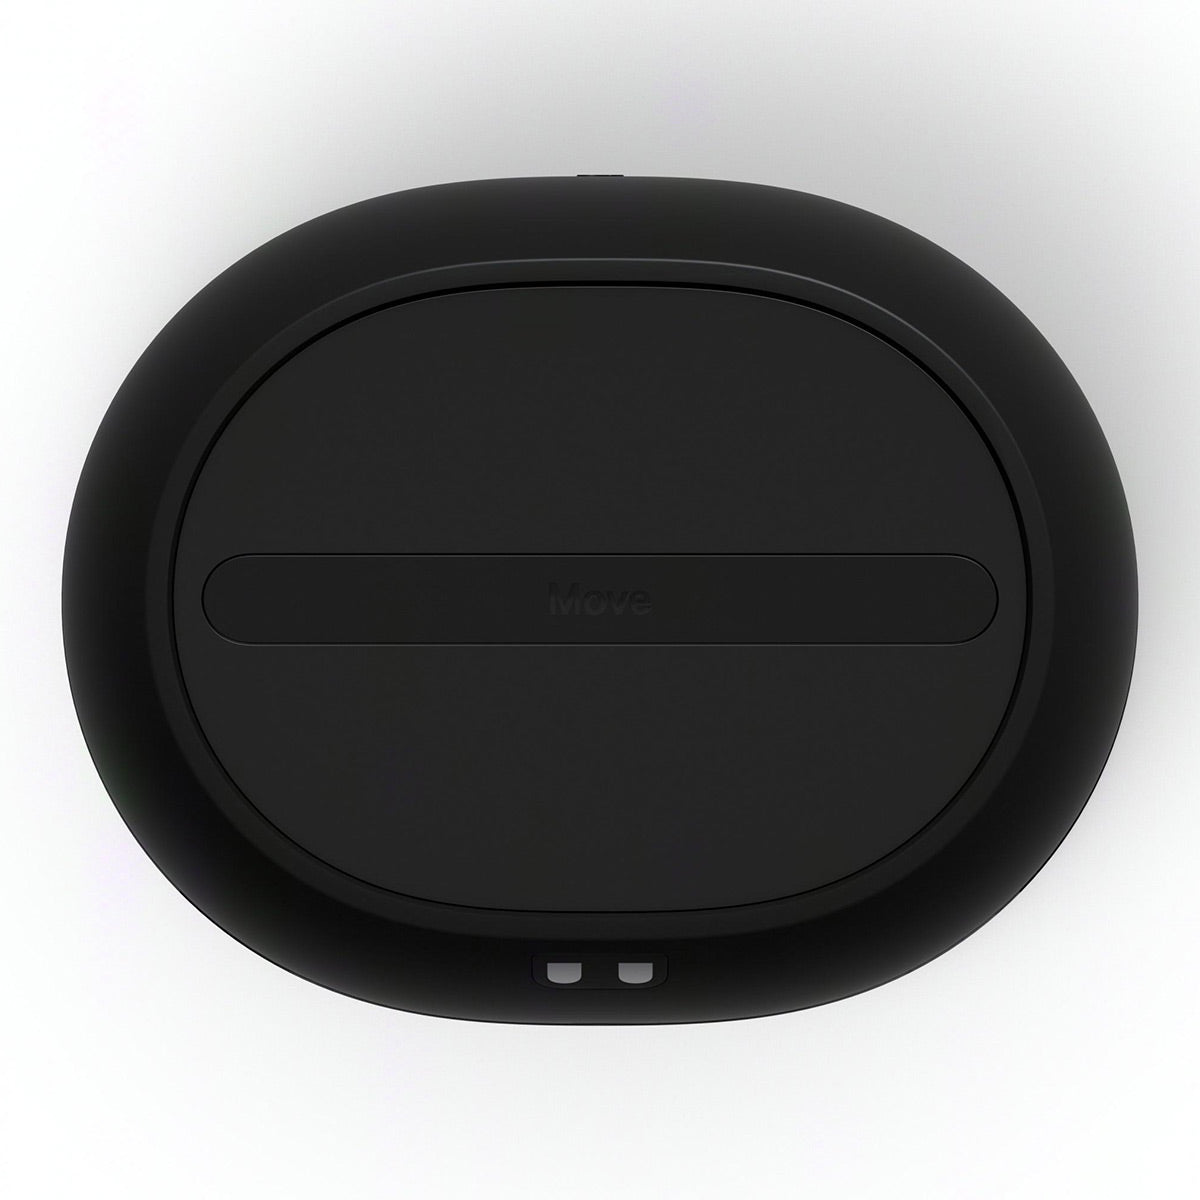 with | and Wi-Fi (Black) Battery Stereo Life, Speaker World Move 2 Smart Bluetooth, Portable Wide Sonos 24-Hour